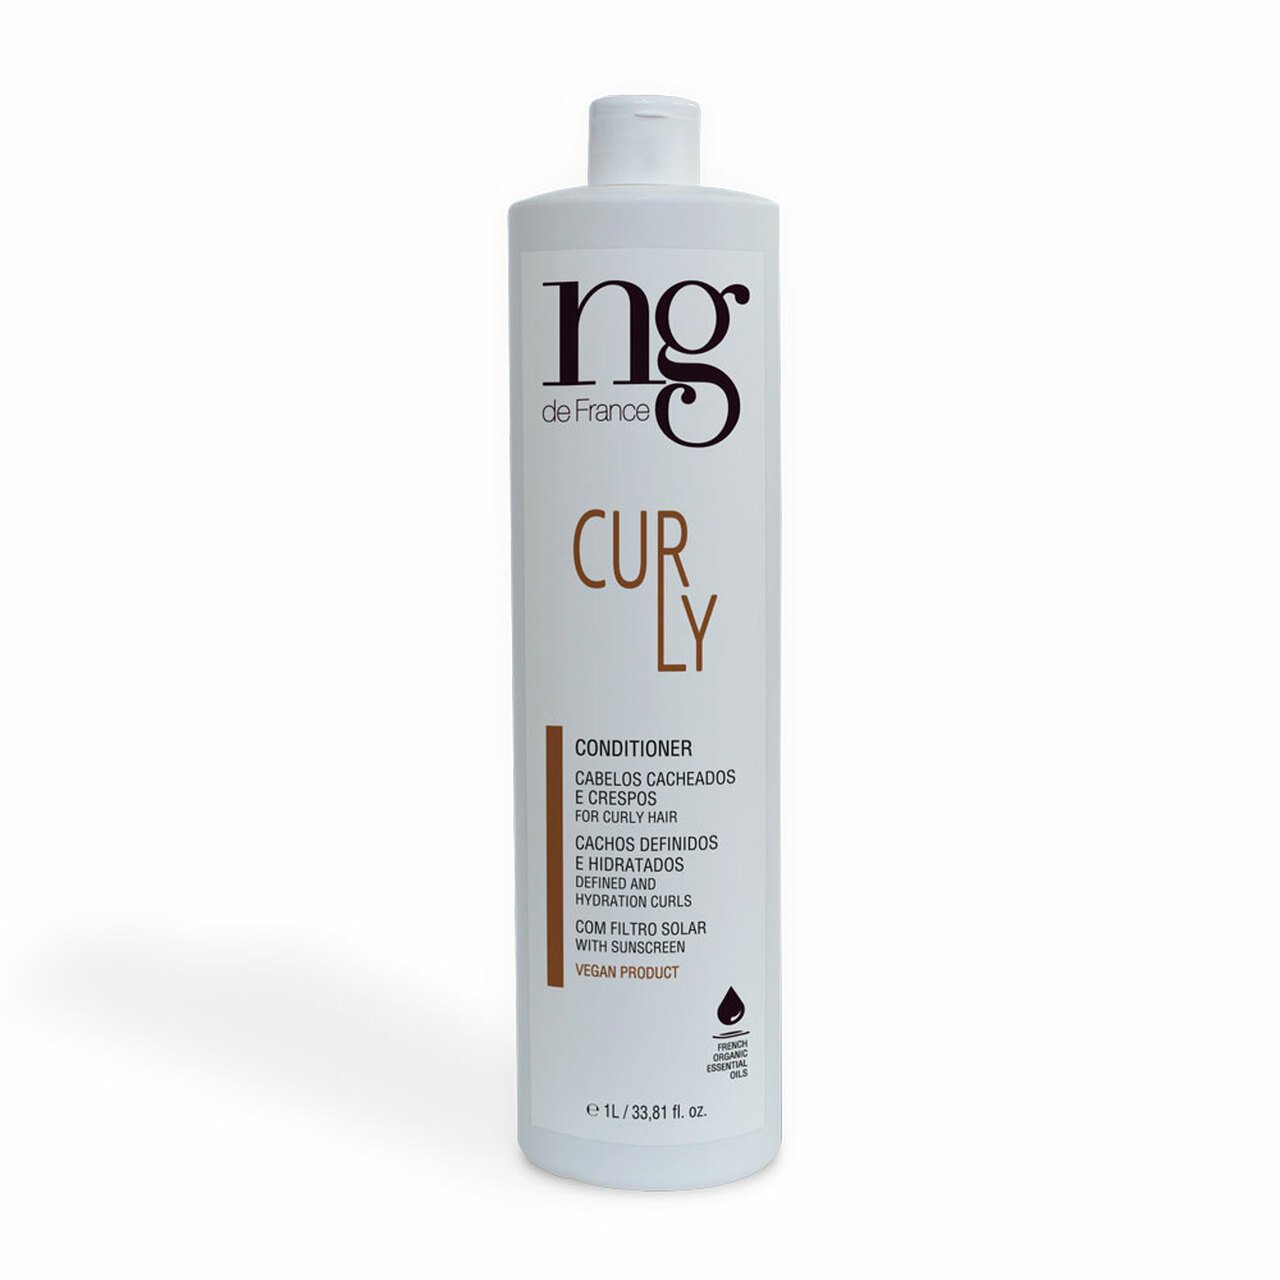 NG de France Hair Care Curly Conditioner 1000ML - NG de France